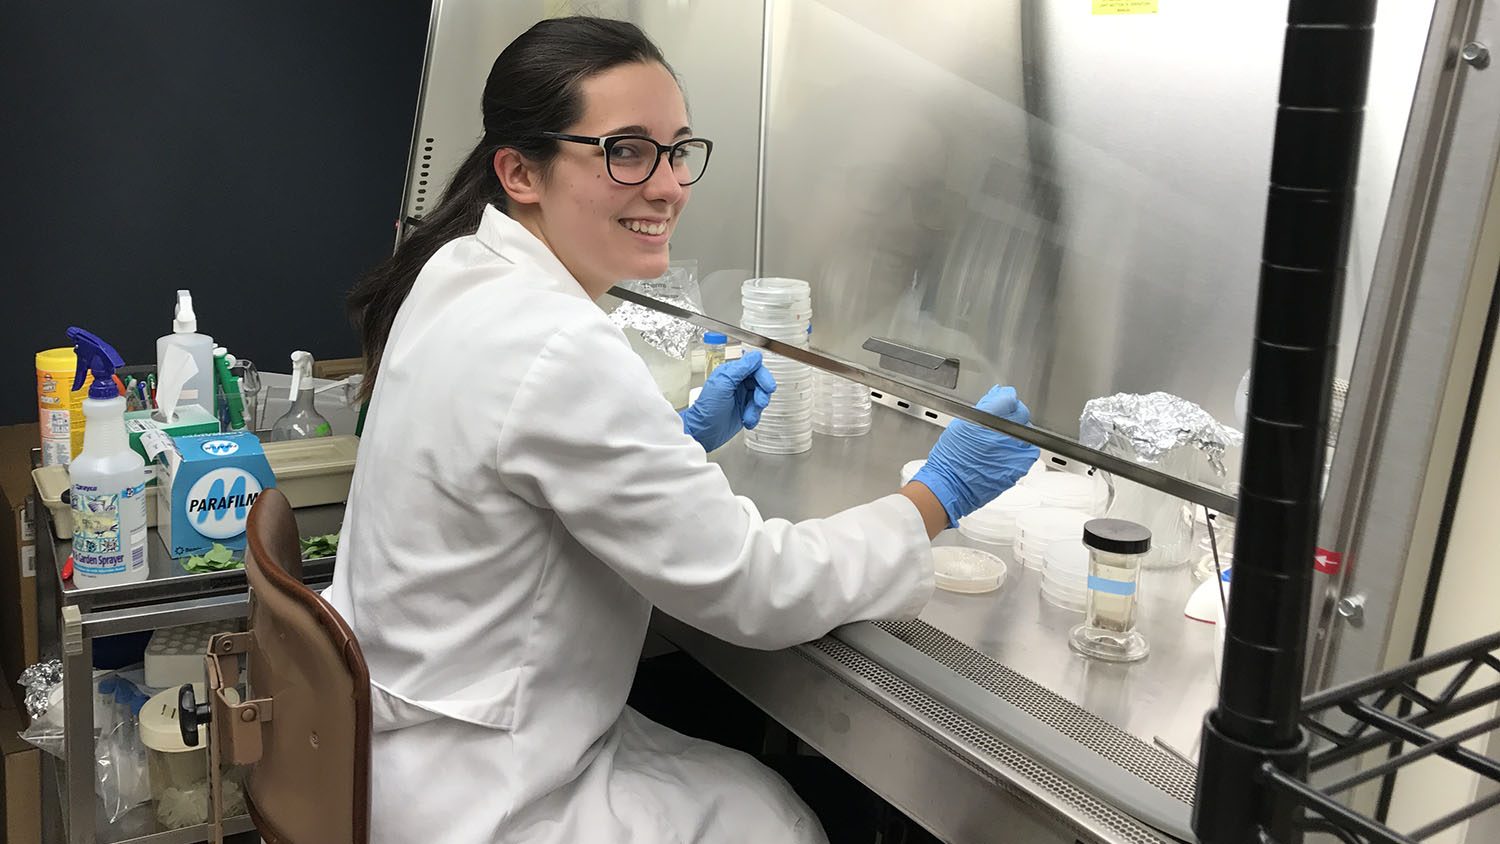 Undergrad research assistant plating fungal samples